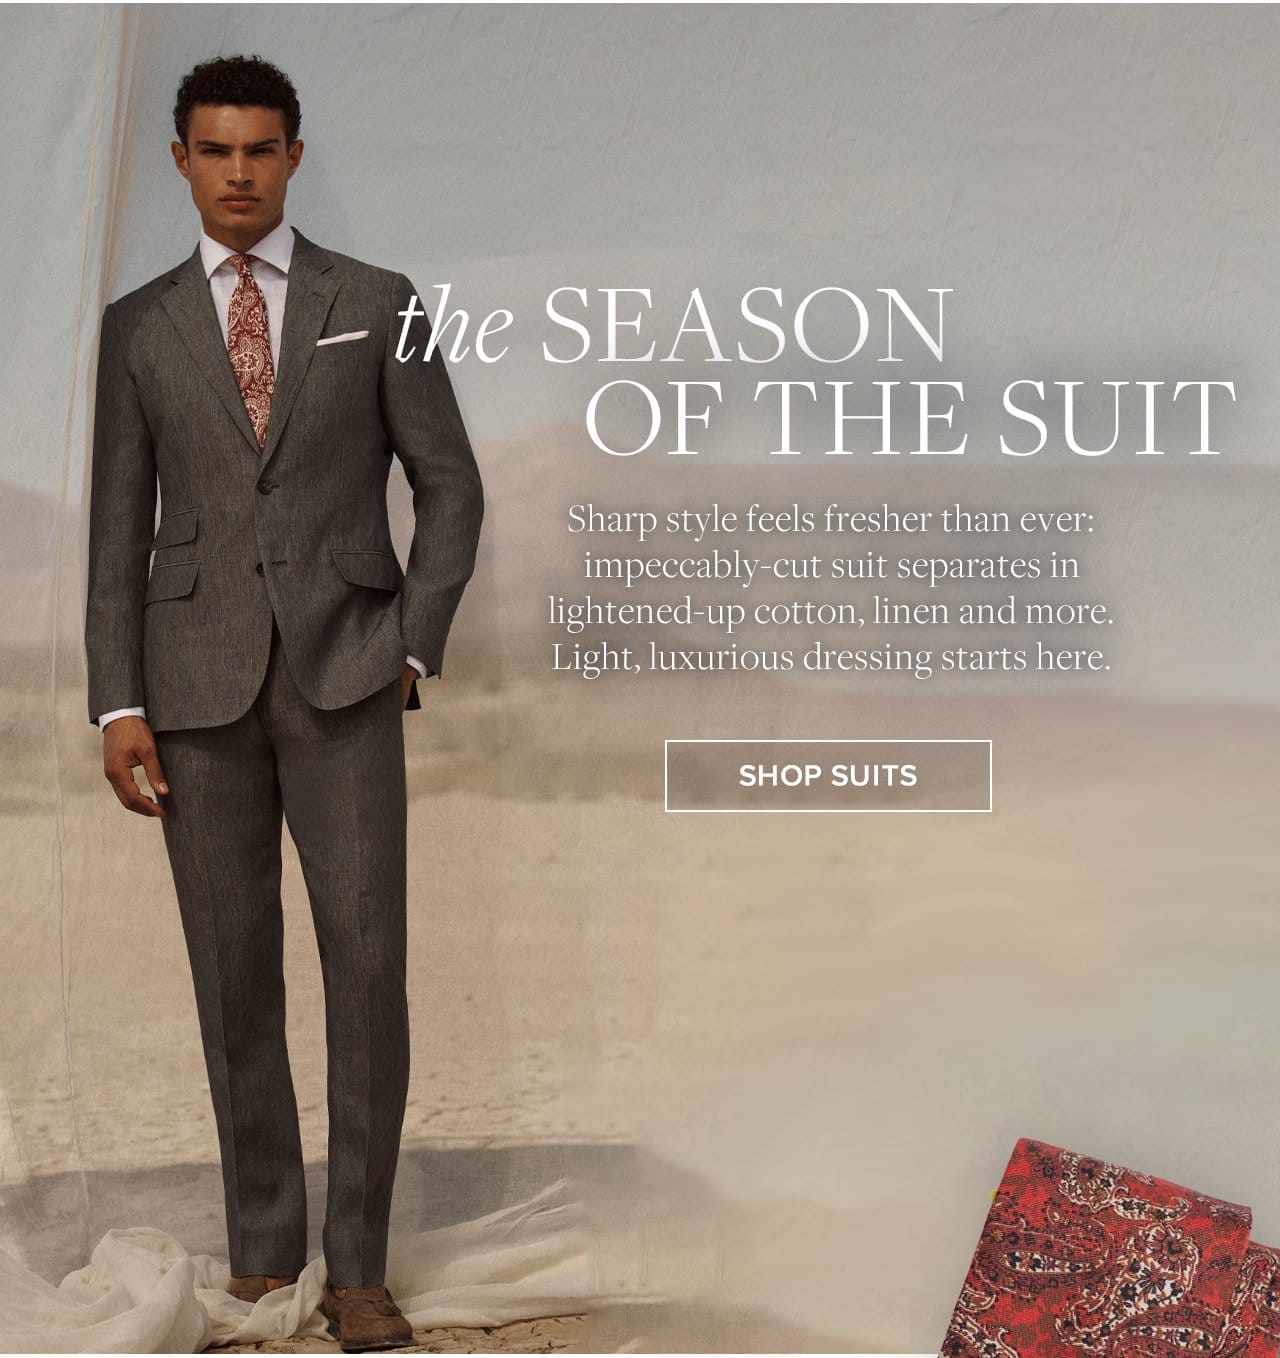 the Season Of The Suit Sharp style feels fresher than ever: impeccably-cut suit separates in lightened-up cotton, linen and more. Light, luxurious dressing starts here. Shop Suits